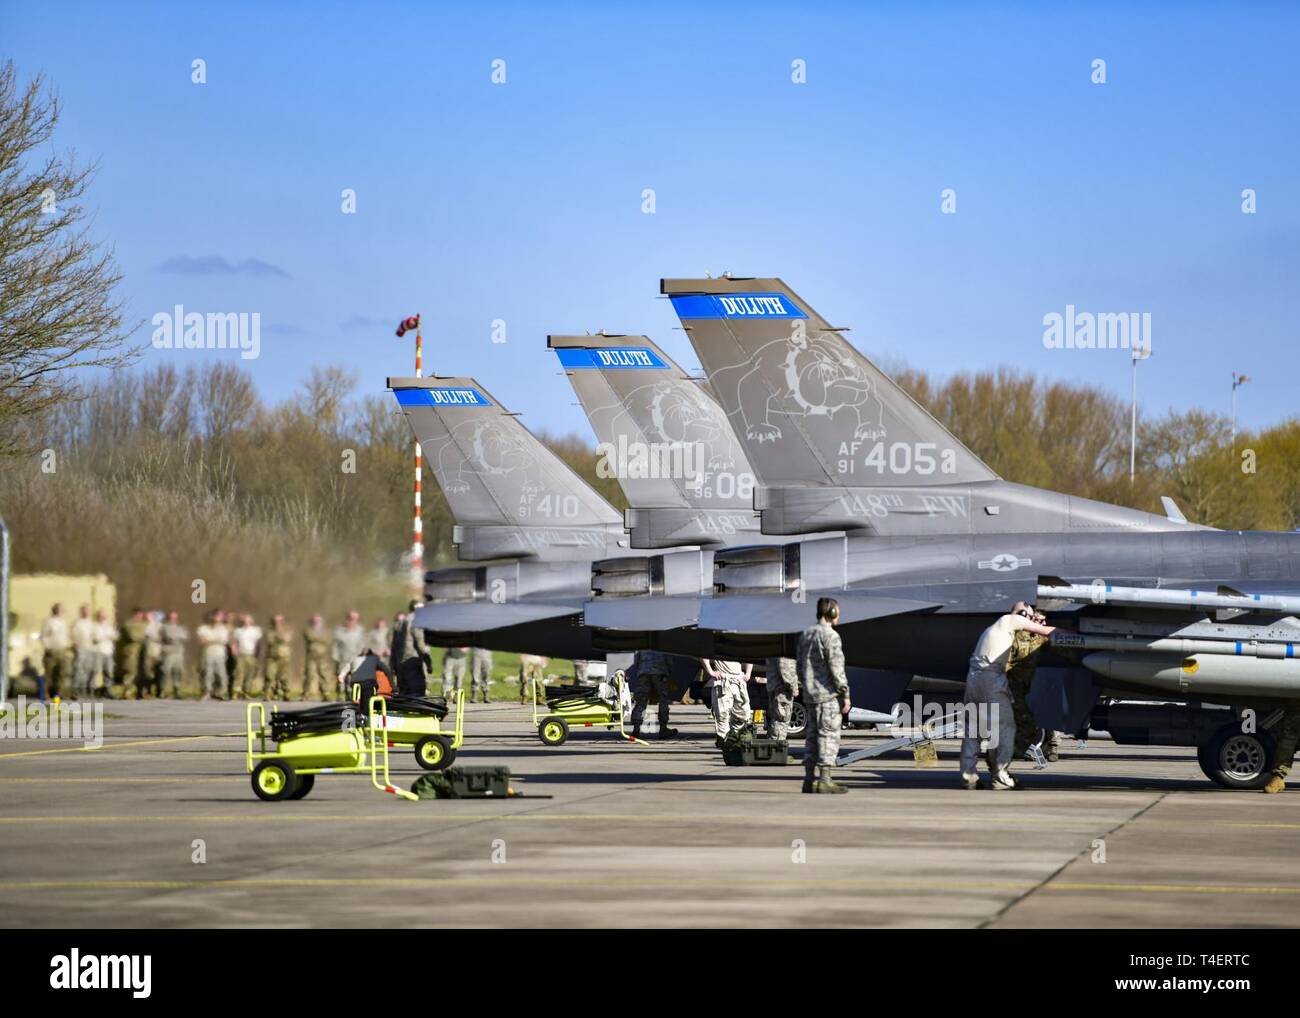 Airmen from the 148th Maintenance Group from the Duluth, Minn. based 148th Fighter Wing recovered and performed routine maintenance activities for five F-16 Aircraft for the 2019 Frisian Flag held at Leeuwarden Air Base, March 29, 2019.  Frisian Flag is a 12-day NATO partnership exercise in the Netherlands that will allow all international participants of the exercise to execute training on operational tactics in a global setting with multiple coalition partners like Germany, Poland, France, and the United States who are participating in this year’s event. Stock Photo